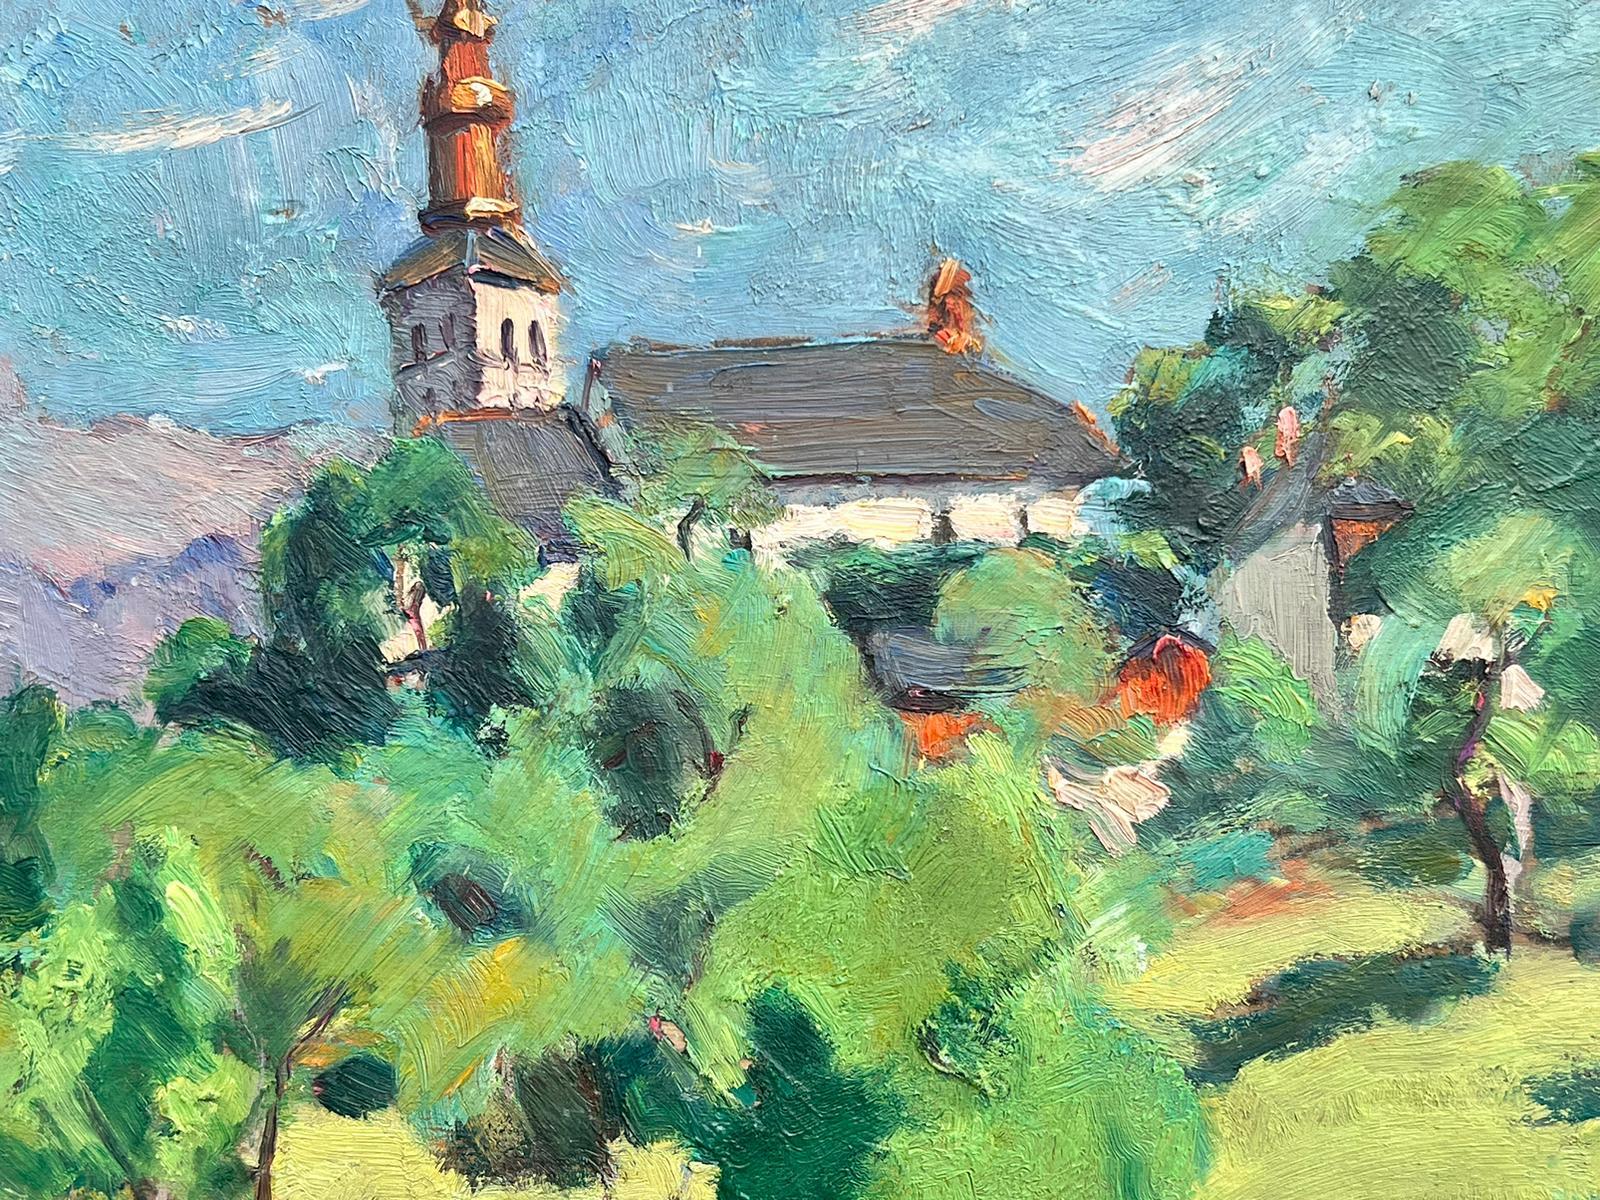 Artist/ School: Suzanne Crochet (French c. 1930), French Impressionist artist

Title: Church in a Landscape

Medium: signed oil on board, unframed

board: 9 x 13 inches

Provenance: private collection, France

Condition: The painting is in overall